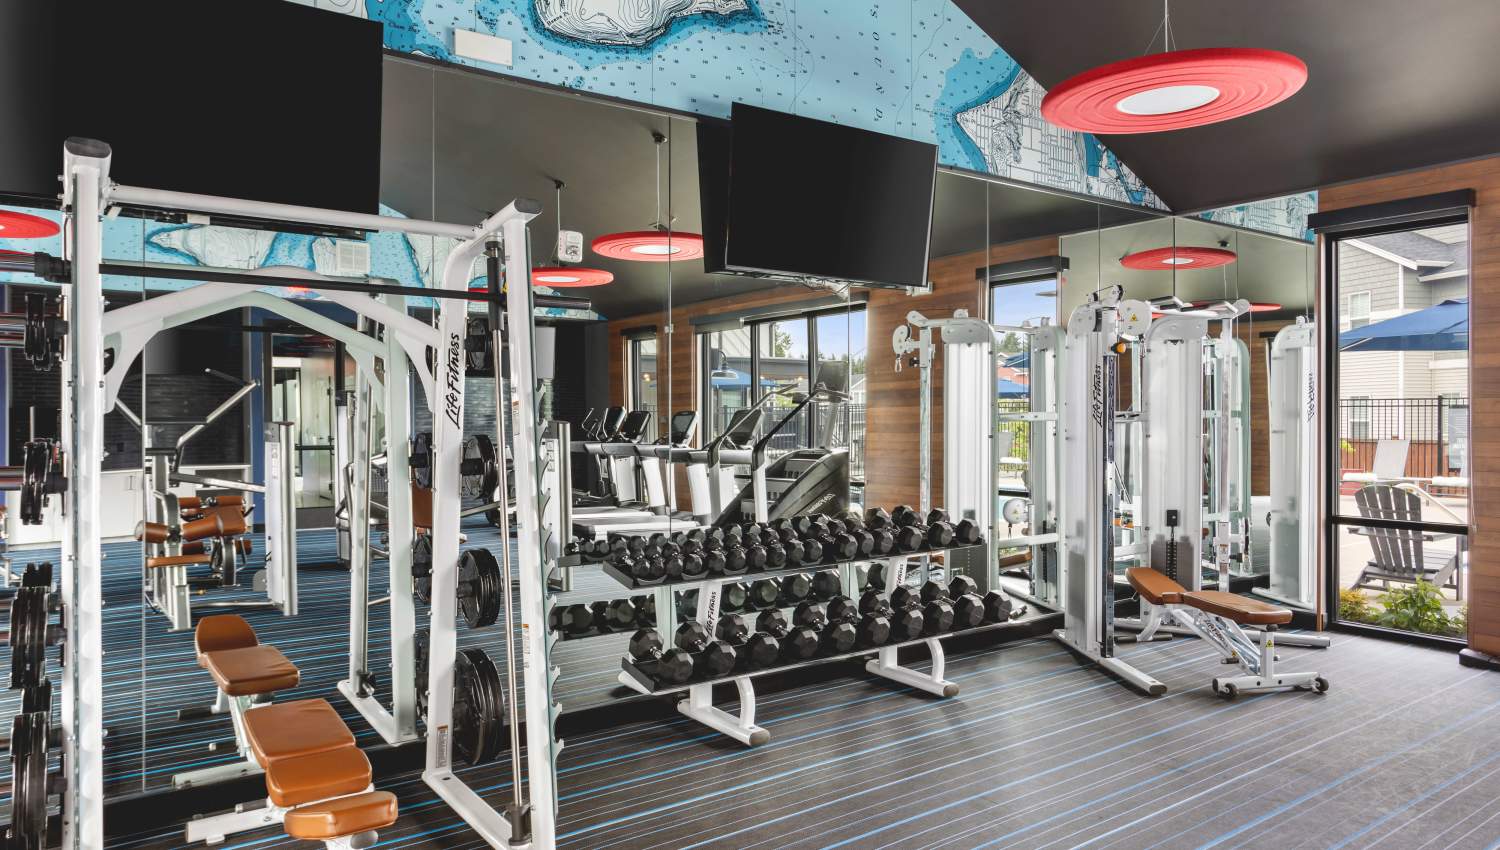 Fitness center with rack of weights at Helm in Everett, Washington